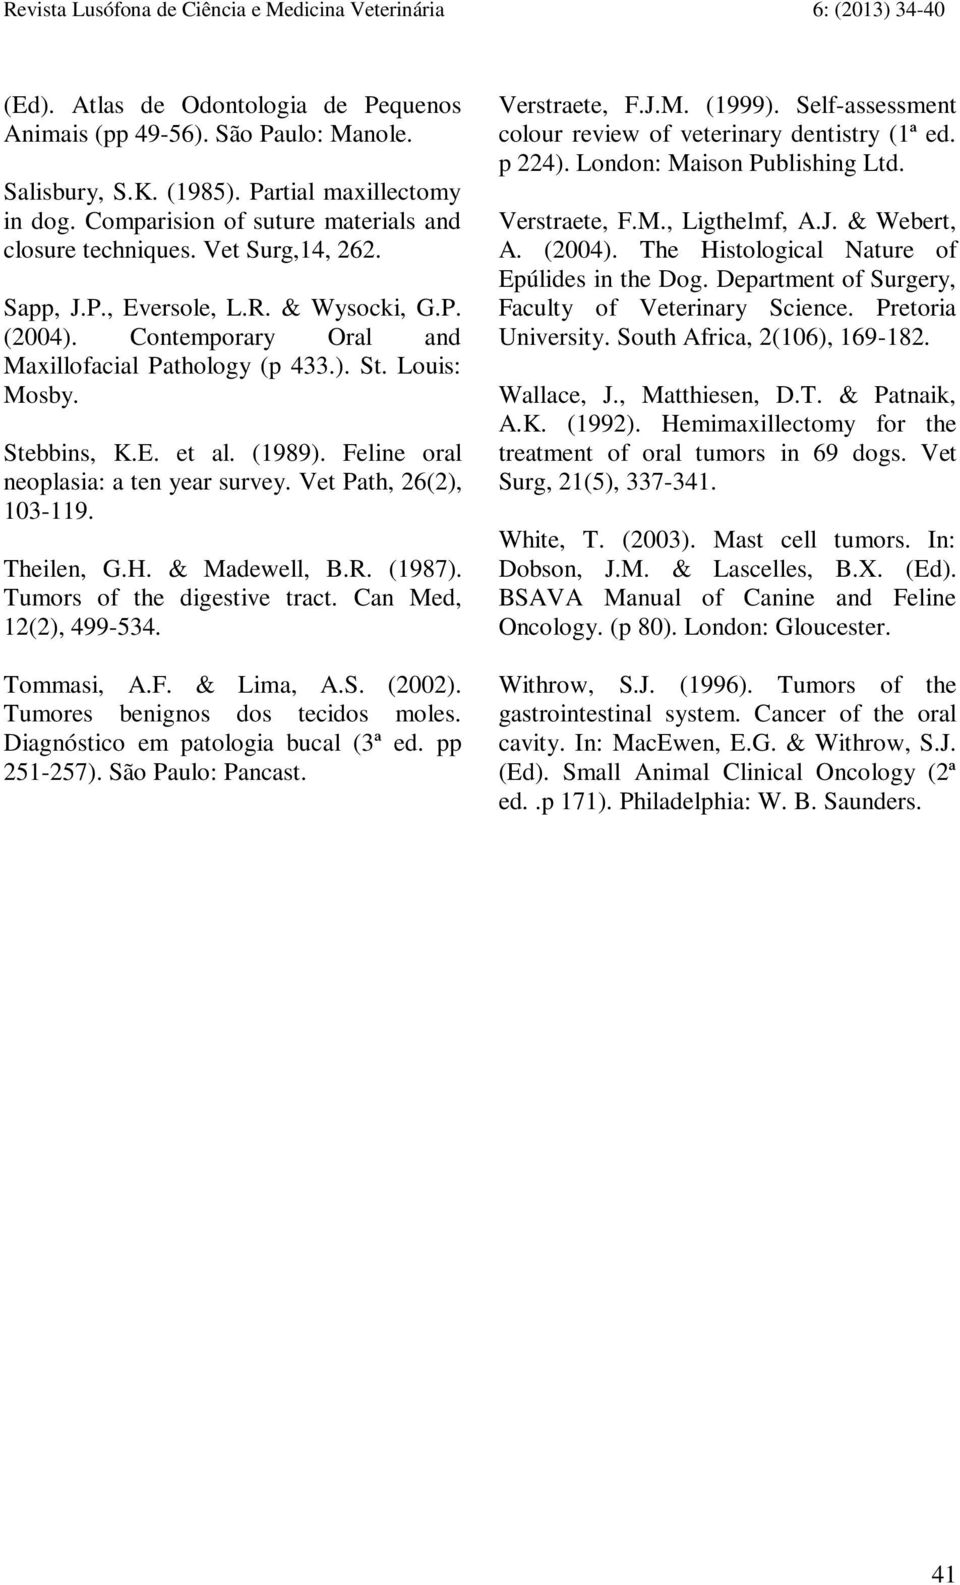 Stebbins, K.E. et al. (1989). Feline oral neoplasia: a ten year survey. Vet Path, 26(2), 103-119. Theilen, G.H. & Madewell, B.R. (1987). Tumors of the digestive tract. Can Med, 12(2), 499-534.